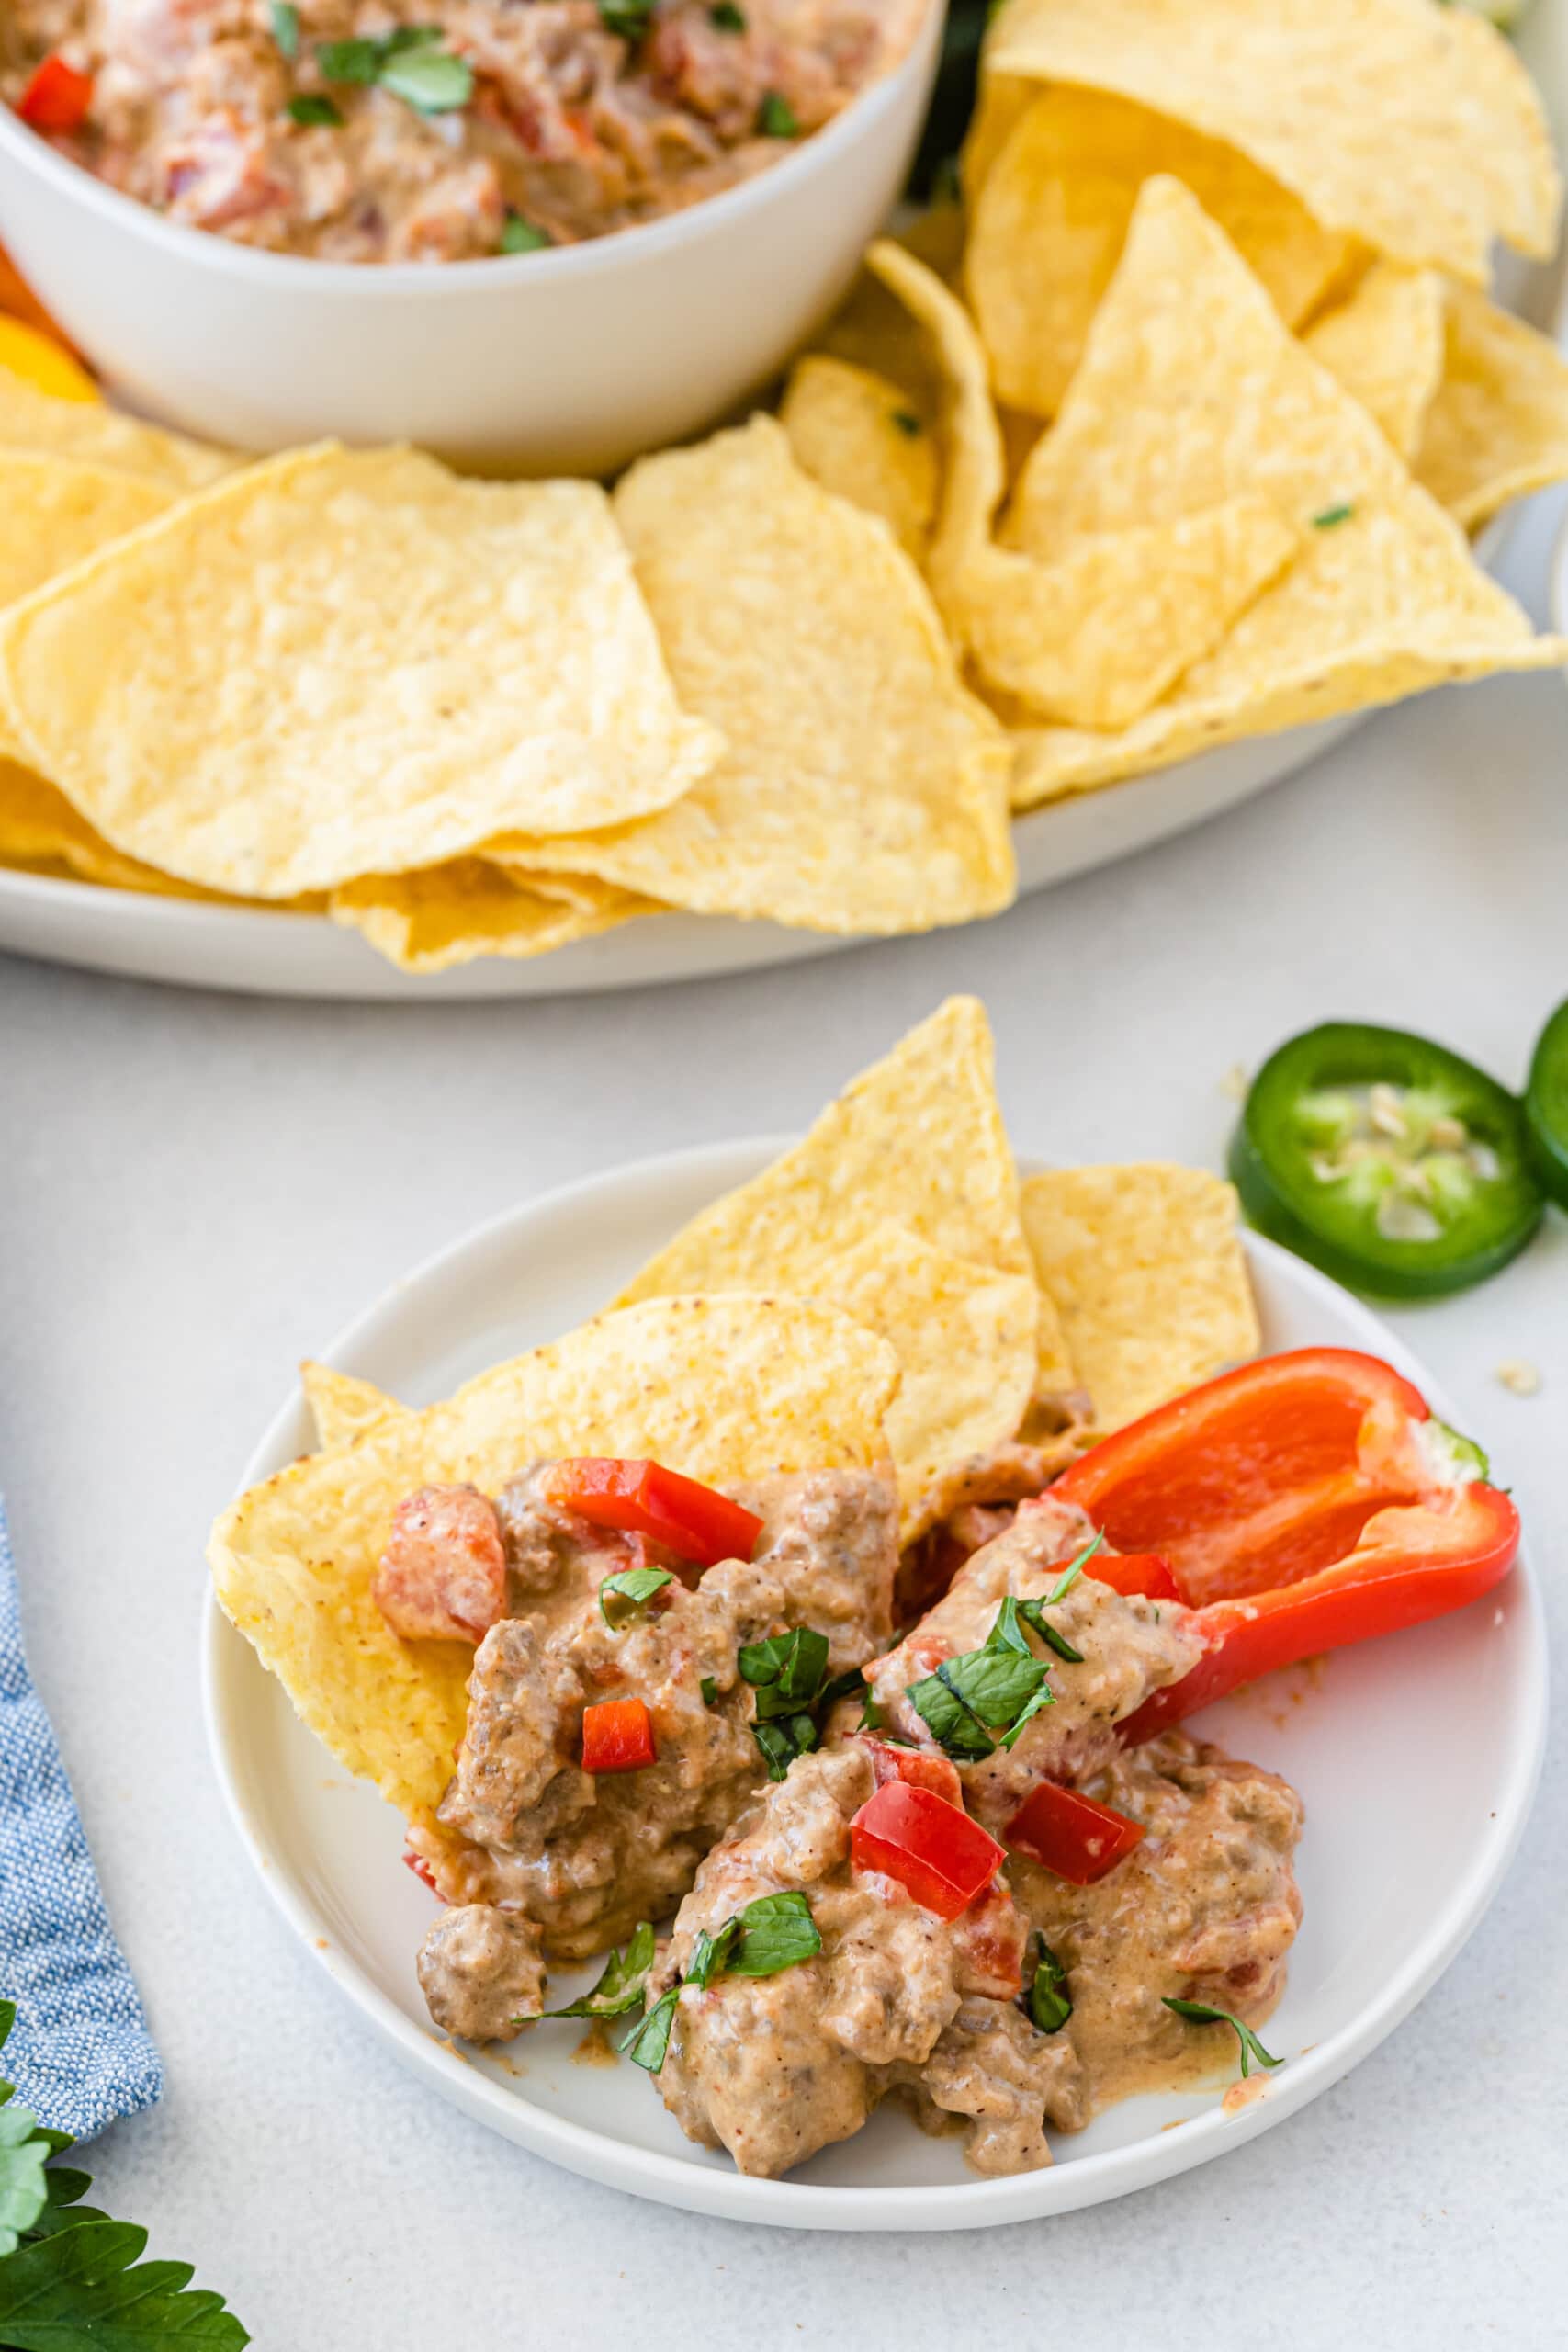 How To Make Rotel Dip With Ground Beef And Sausage?